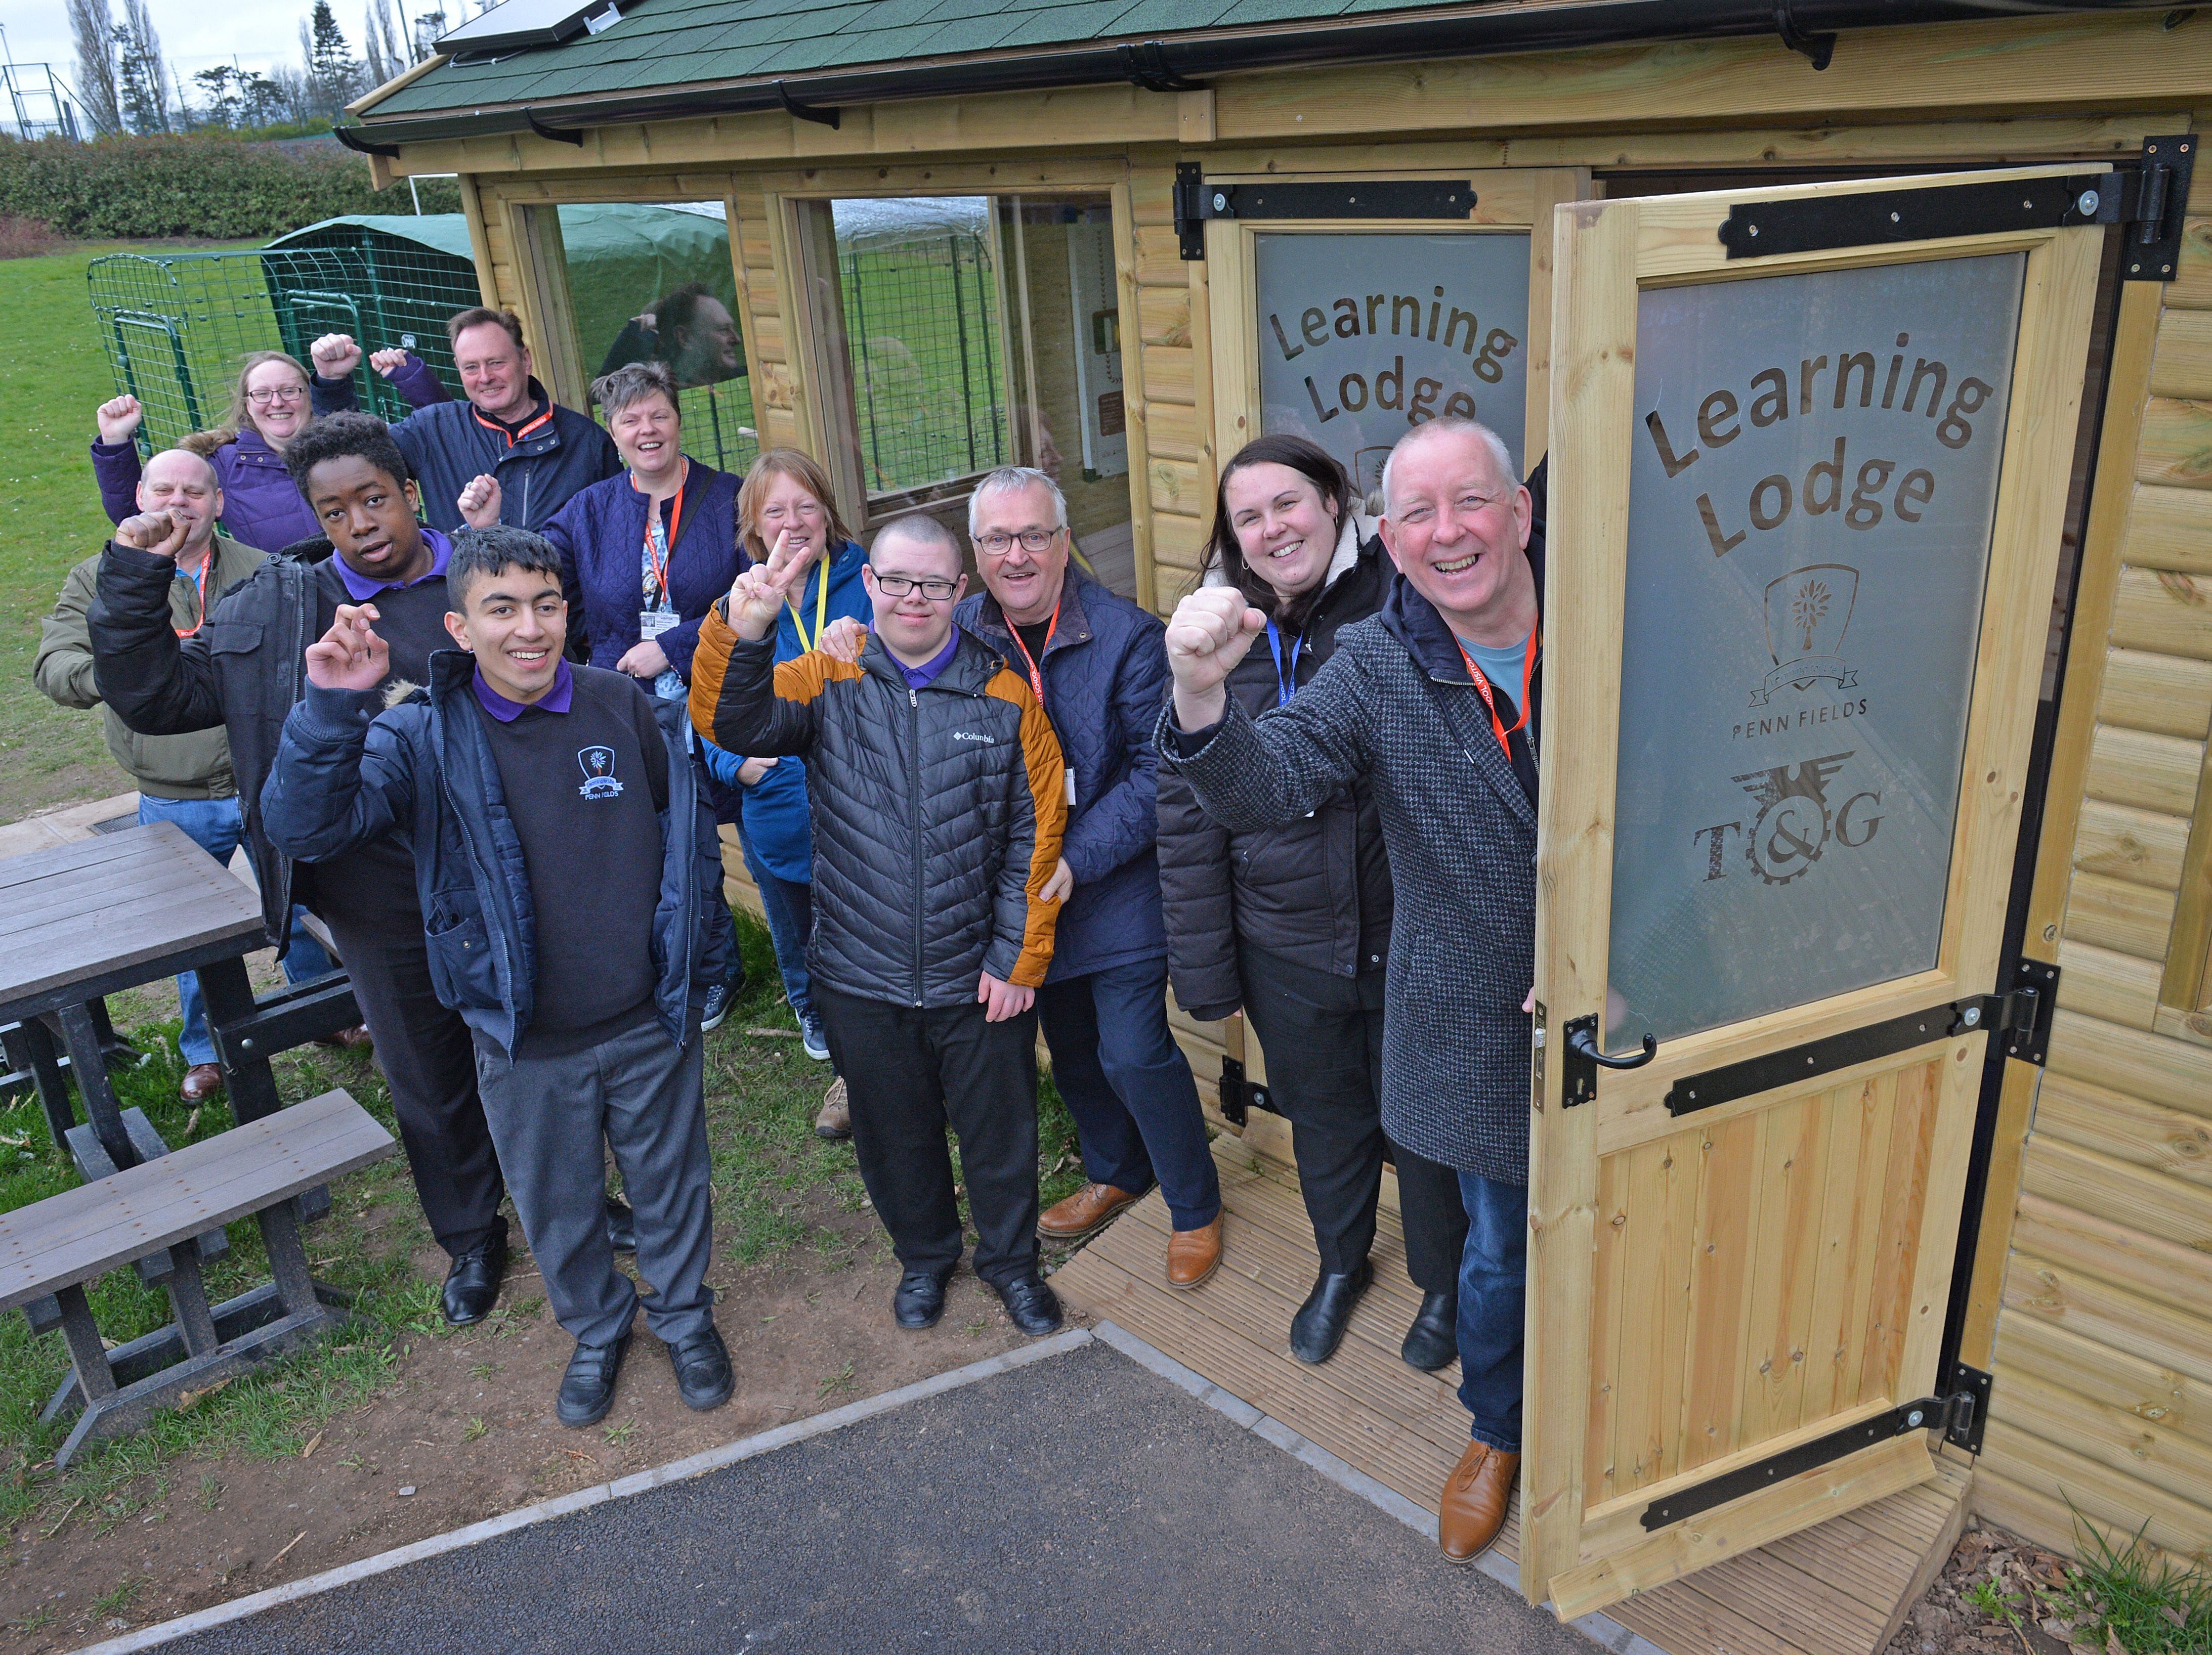 Former Goodyear employees donate £12,125 to help fund a new special school outdoor classroom
